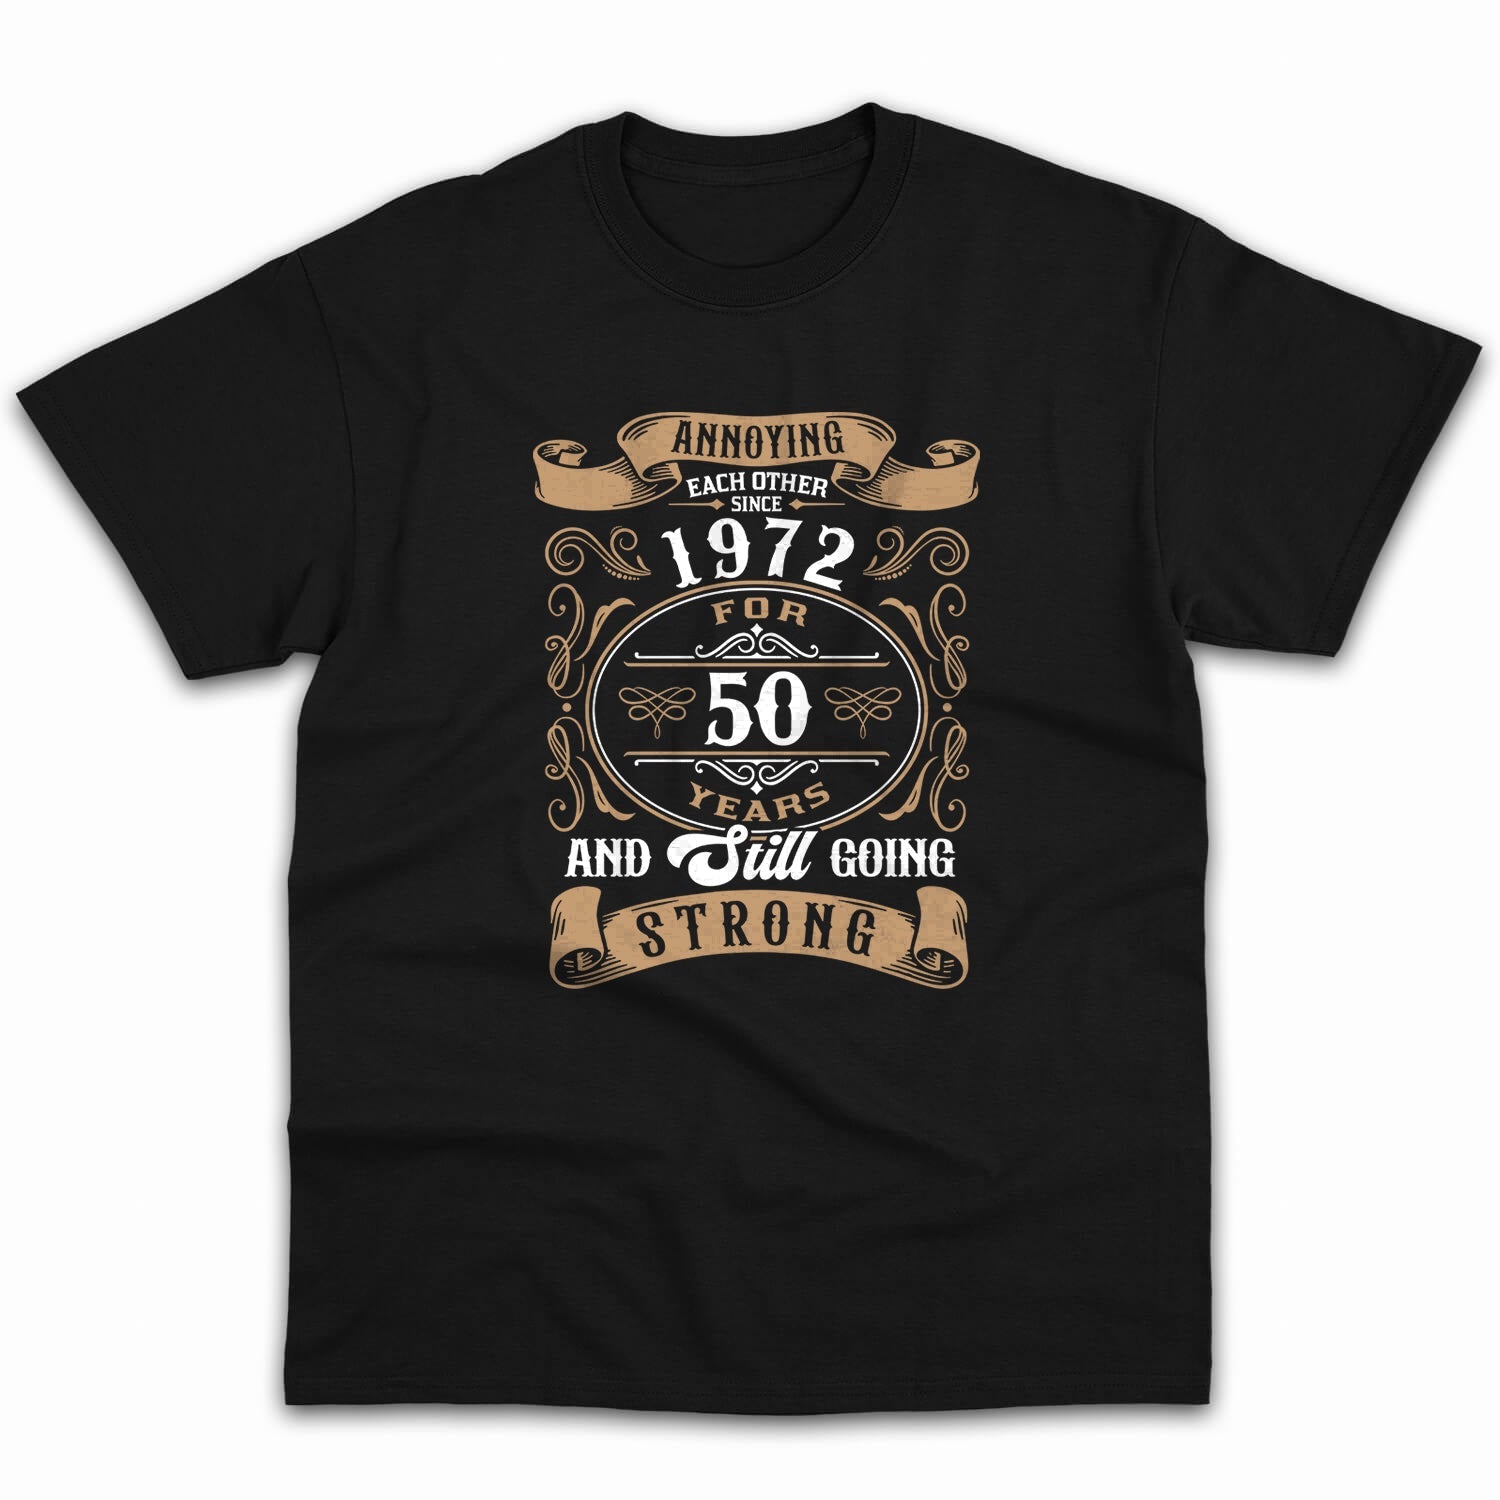 Annoying Each Other For 50 Years - Personalized 50 Year Anniversary gift for Husband or Wife - Custom Tshirt - MyMindfulGifts